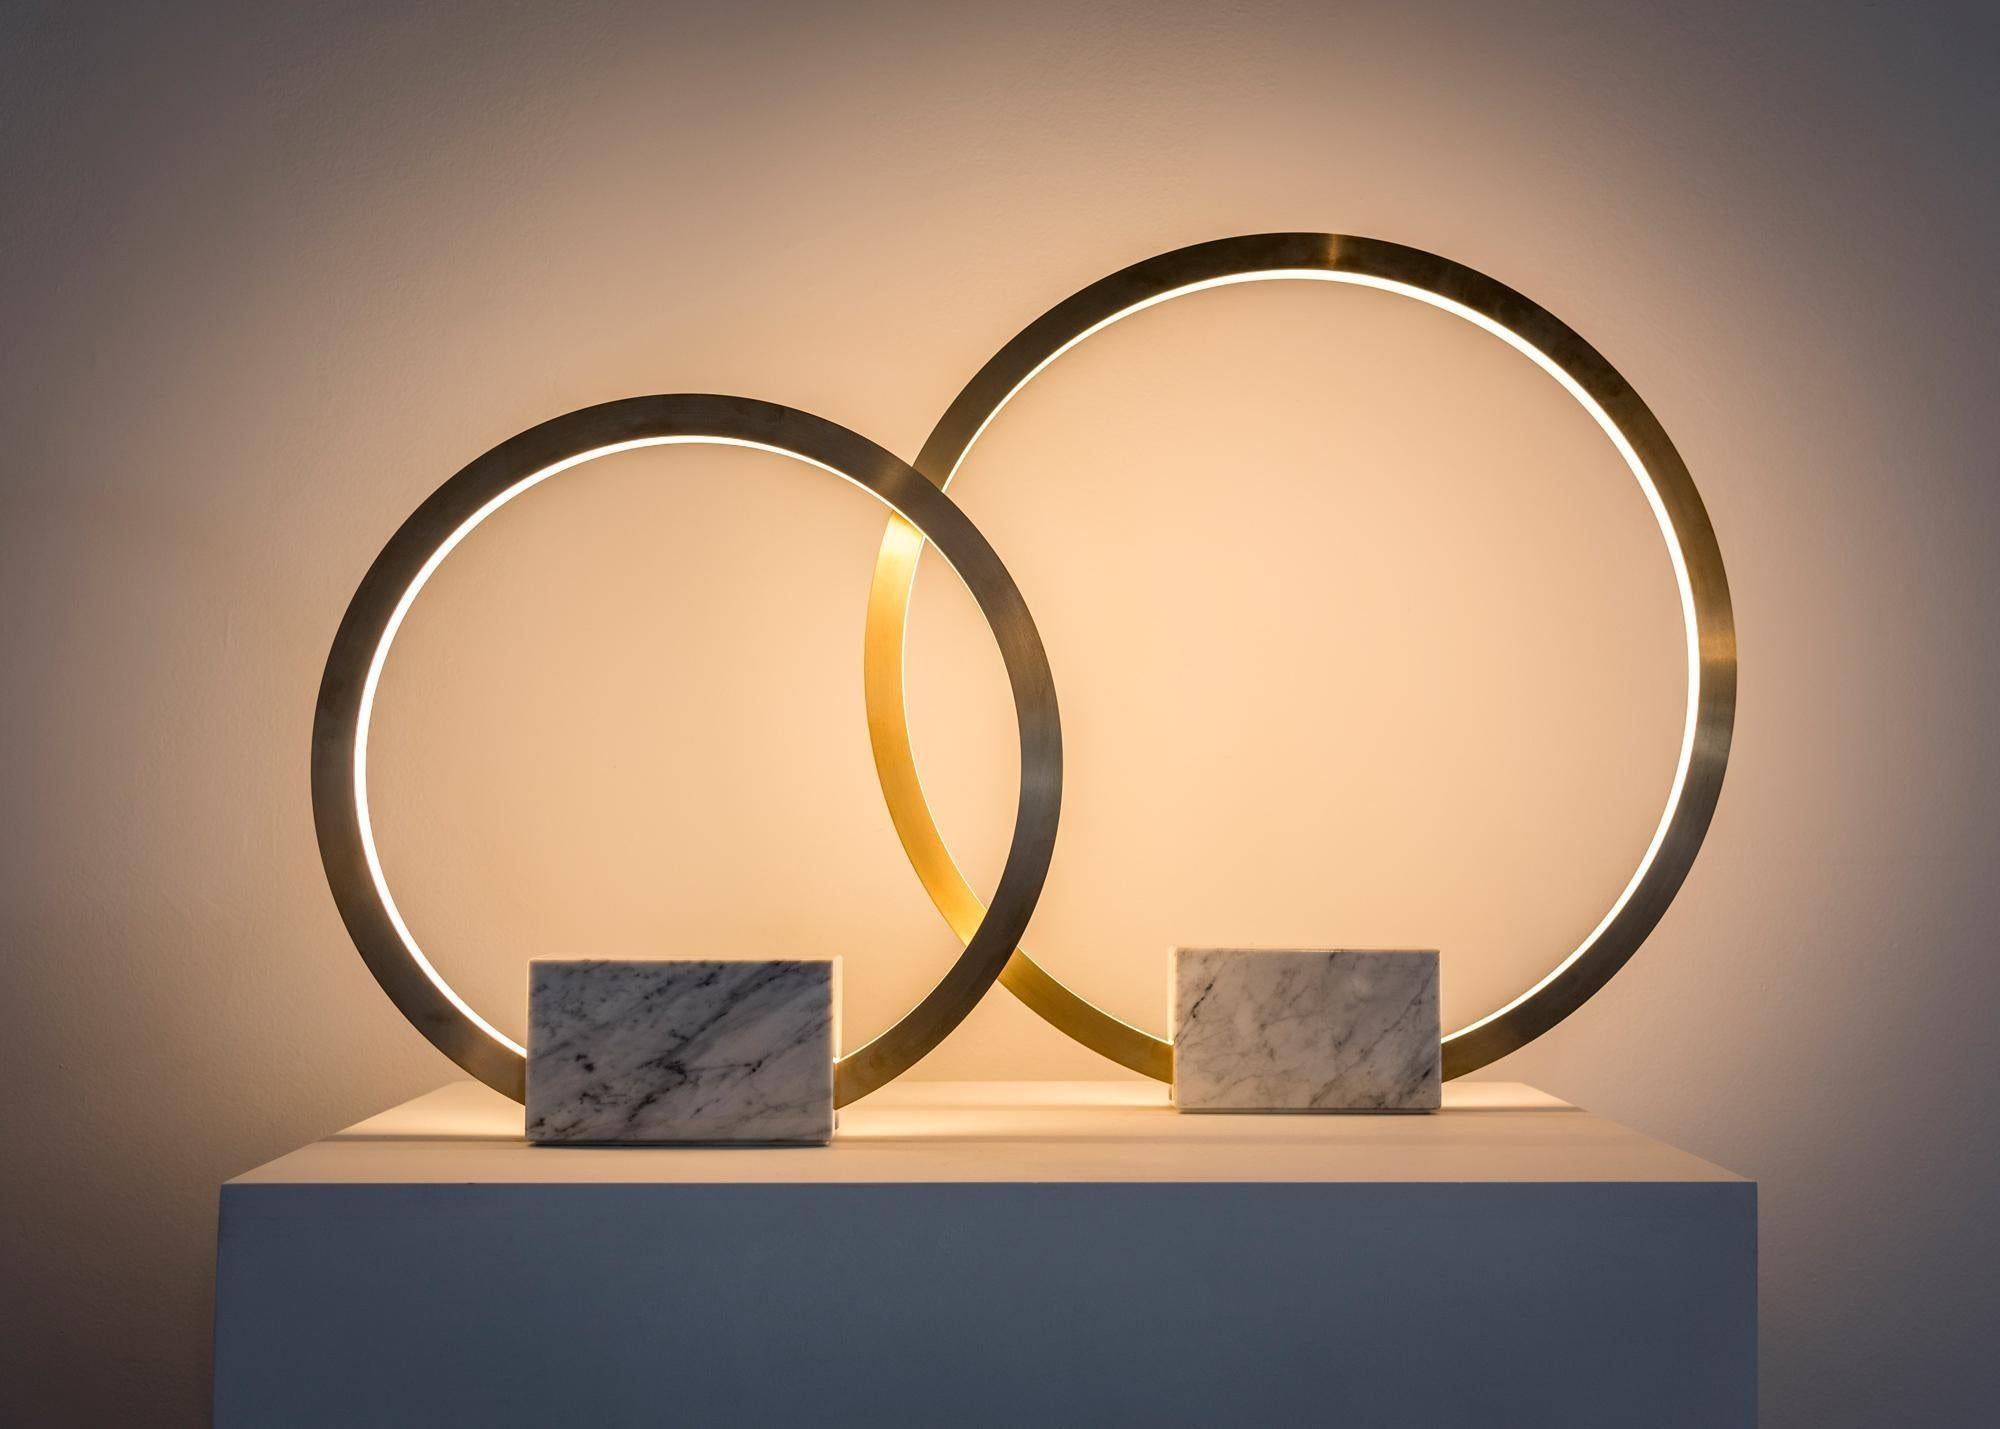 Contemporary table light in brass with marble base, Portal 450 by Christopher Boots

Emanating luminescence from a minimalist form, PORTAL TABLE LAMP embodies the cyclical nature of existence.

Looking through PORTAL TABLE LAMP one is drawn